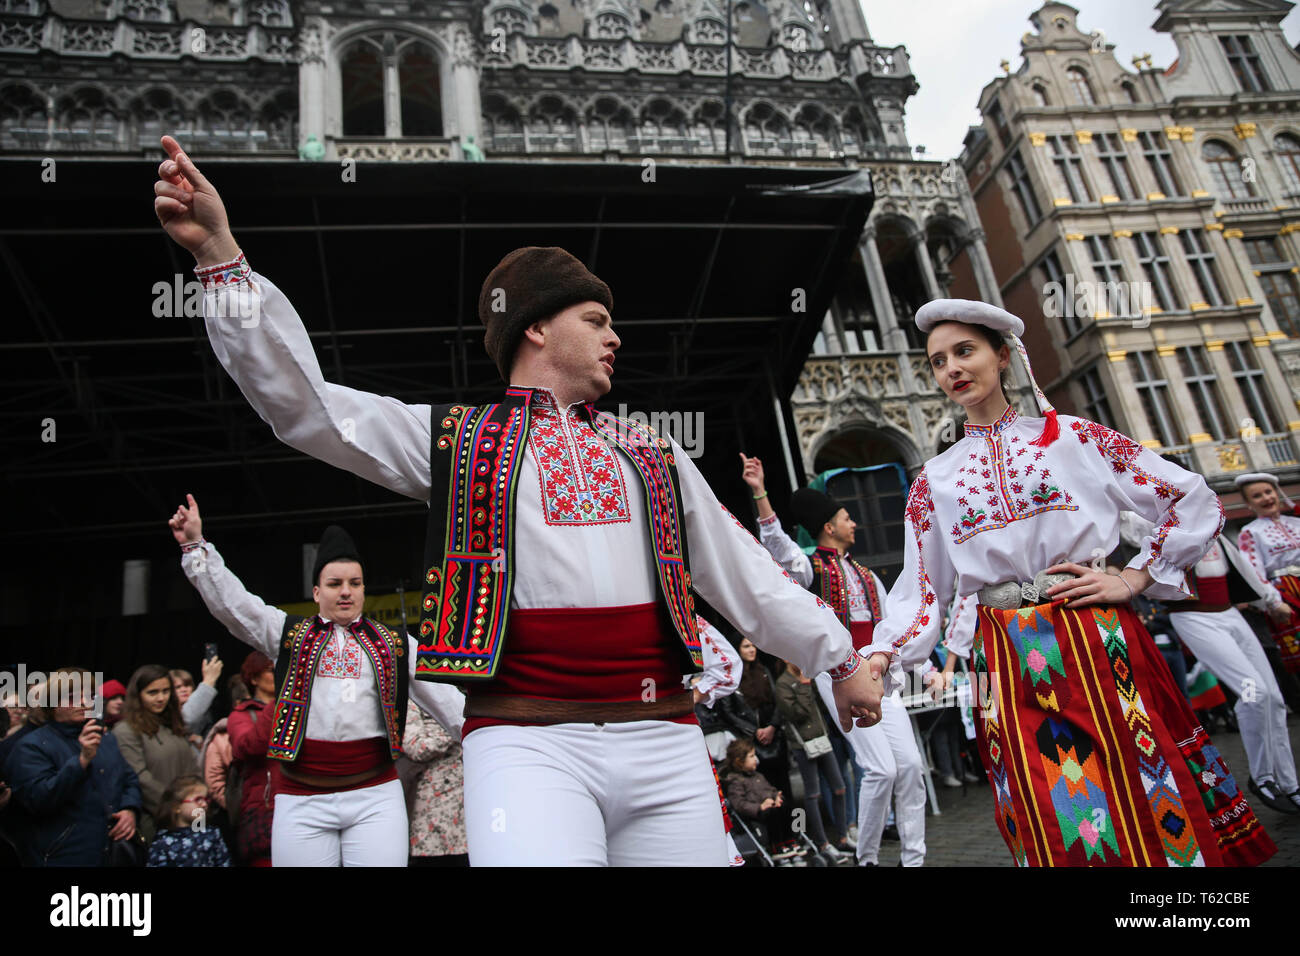 Brussels, Belgium. 28th Apr, 2019. Dancers perform the Bulgarian folk dance on the last day of the 2019 Balkan Trafik at the Grand Place in Brussels, Belgium, April 28, 2019. The festival aims to share the artistic and festive cultures of the Balkans in south-eastern Europe. Credit: Zheng Huansong/Xinhua/Alamy Live News Stock Photo